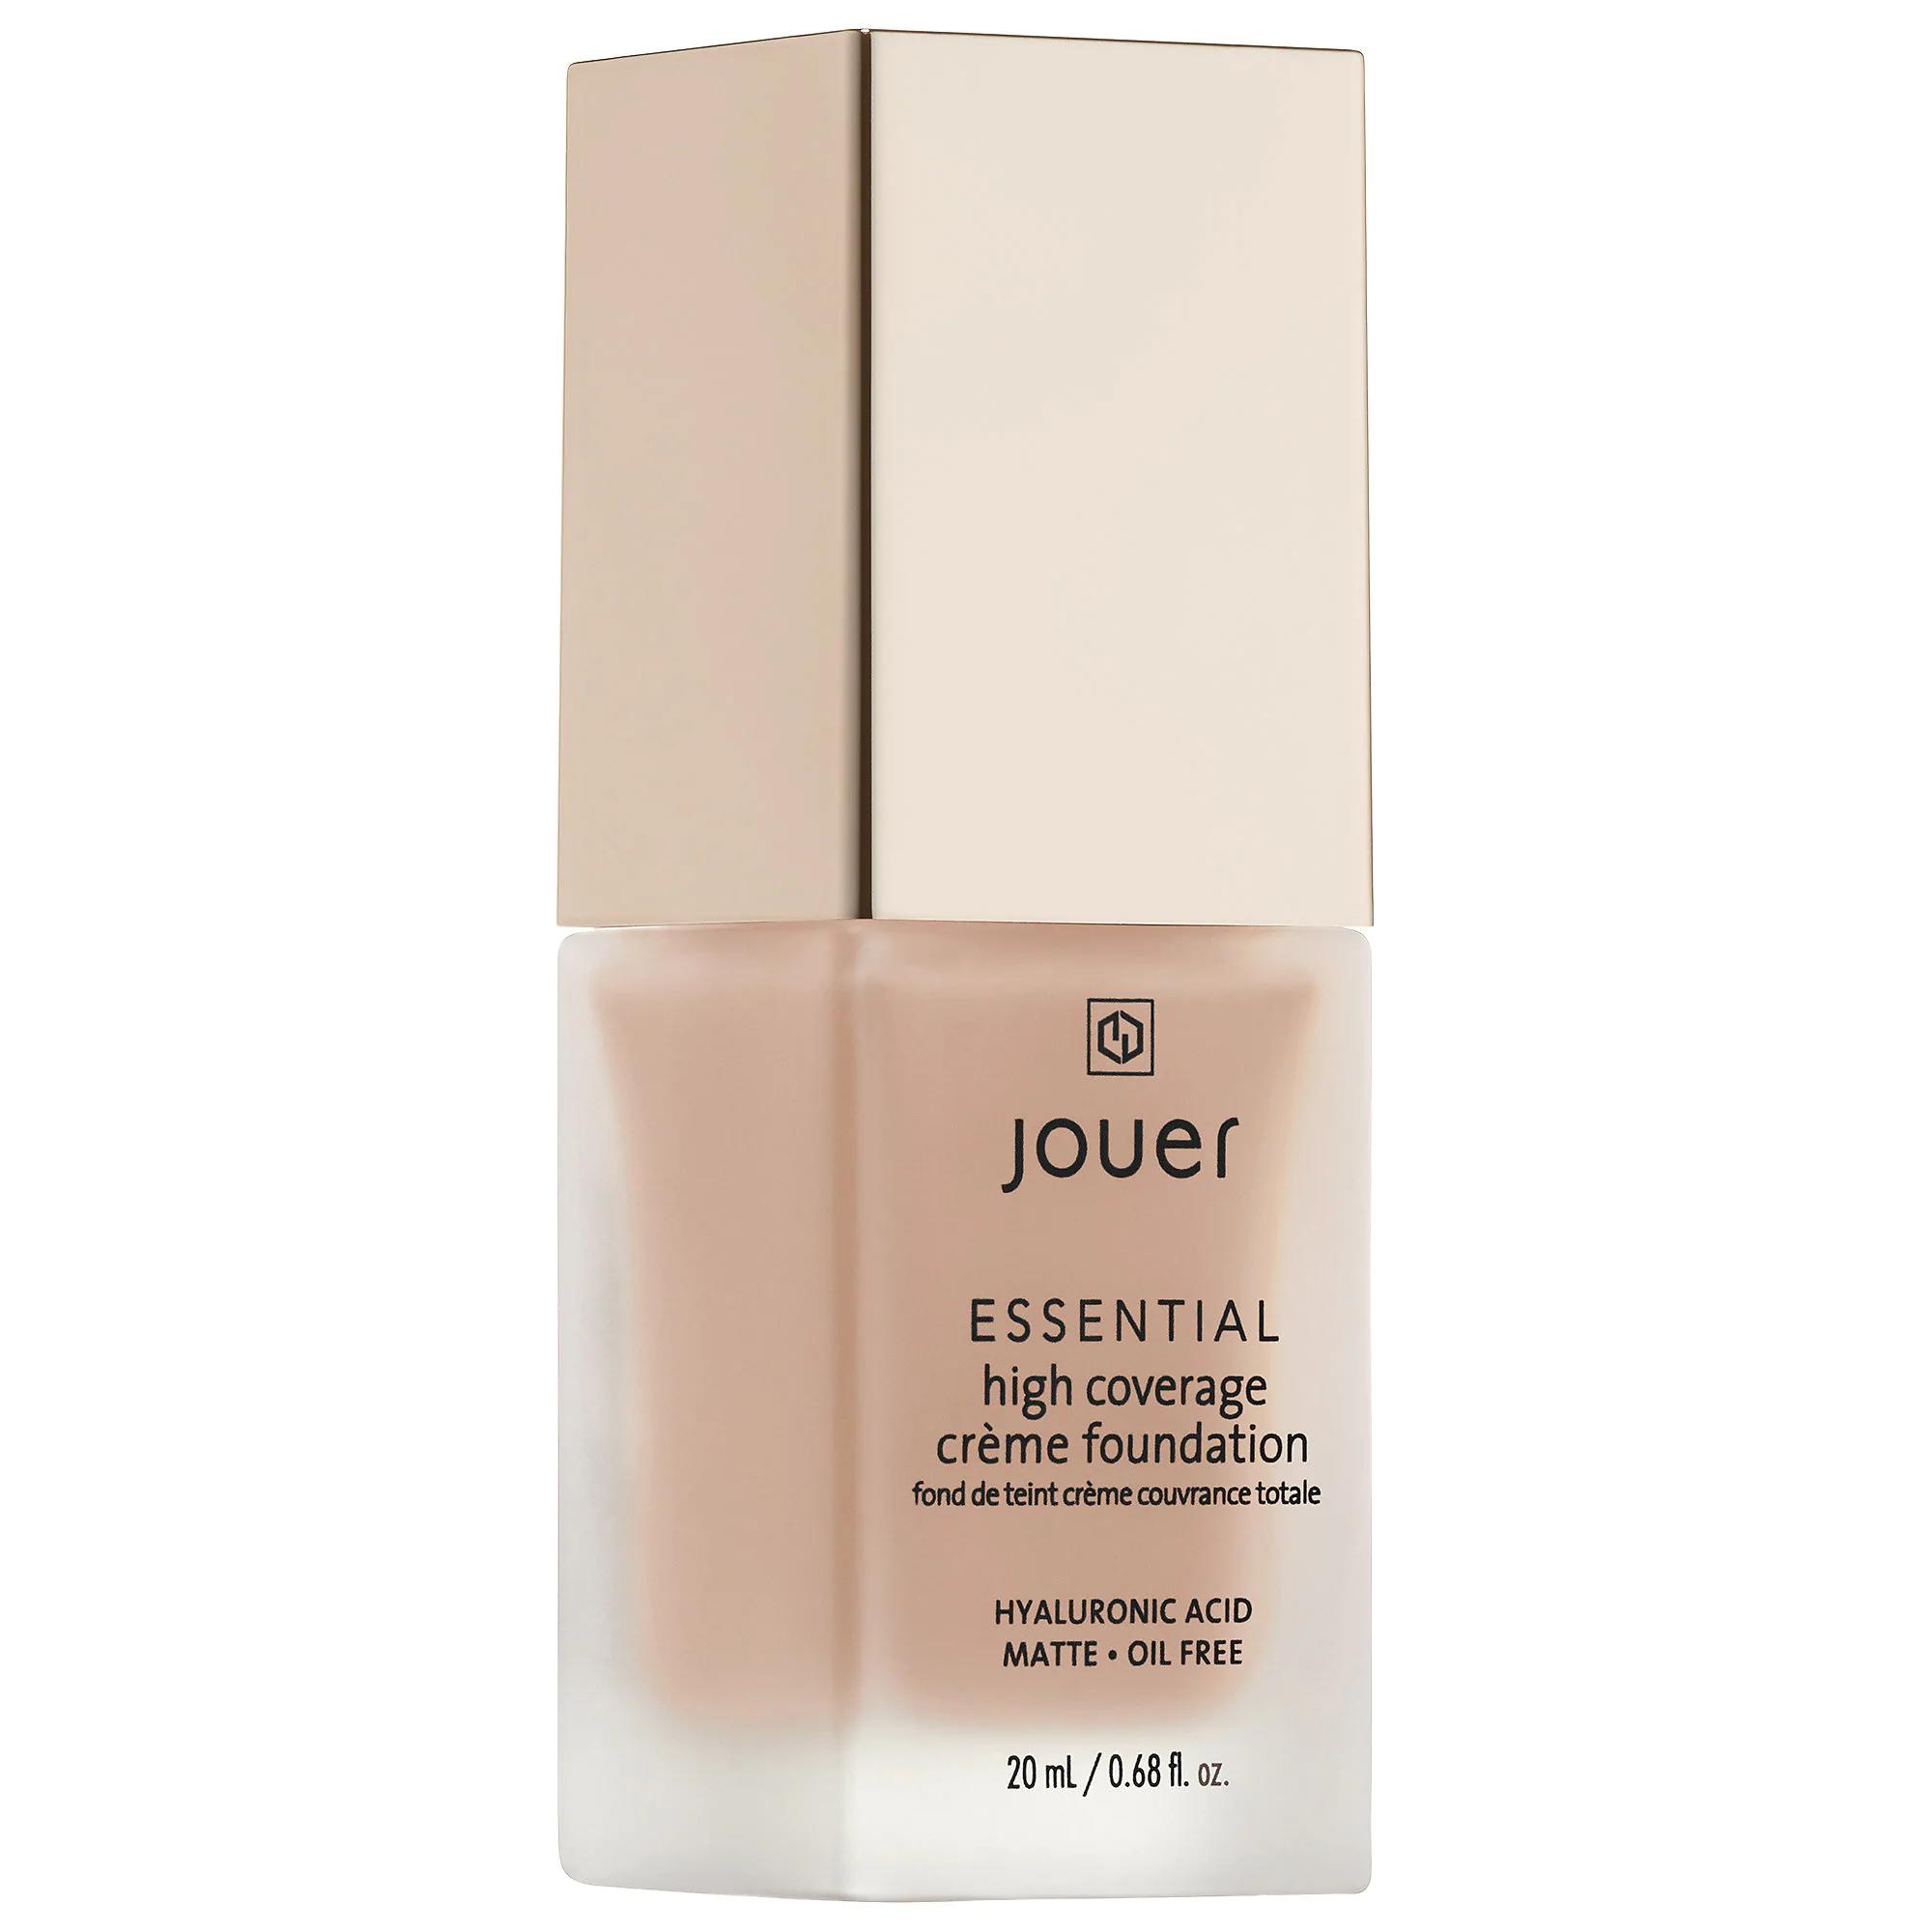 Jouer Essential High Coverage Creme Foundation Biscuit